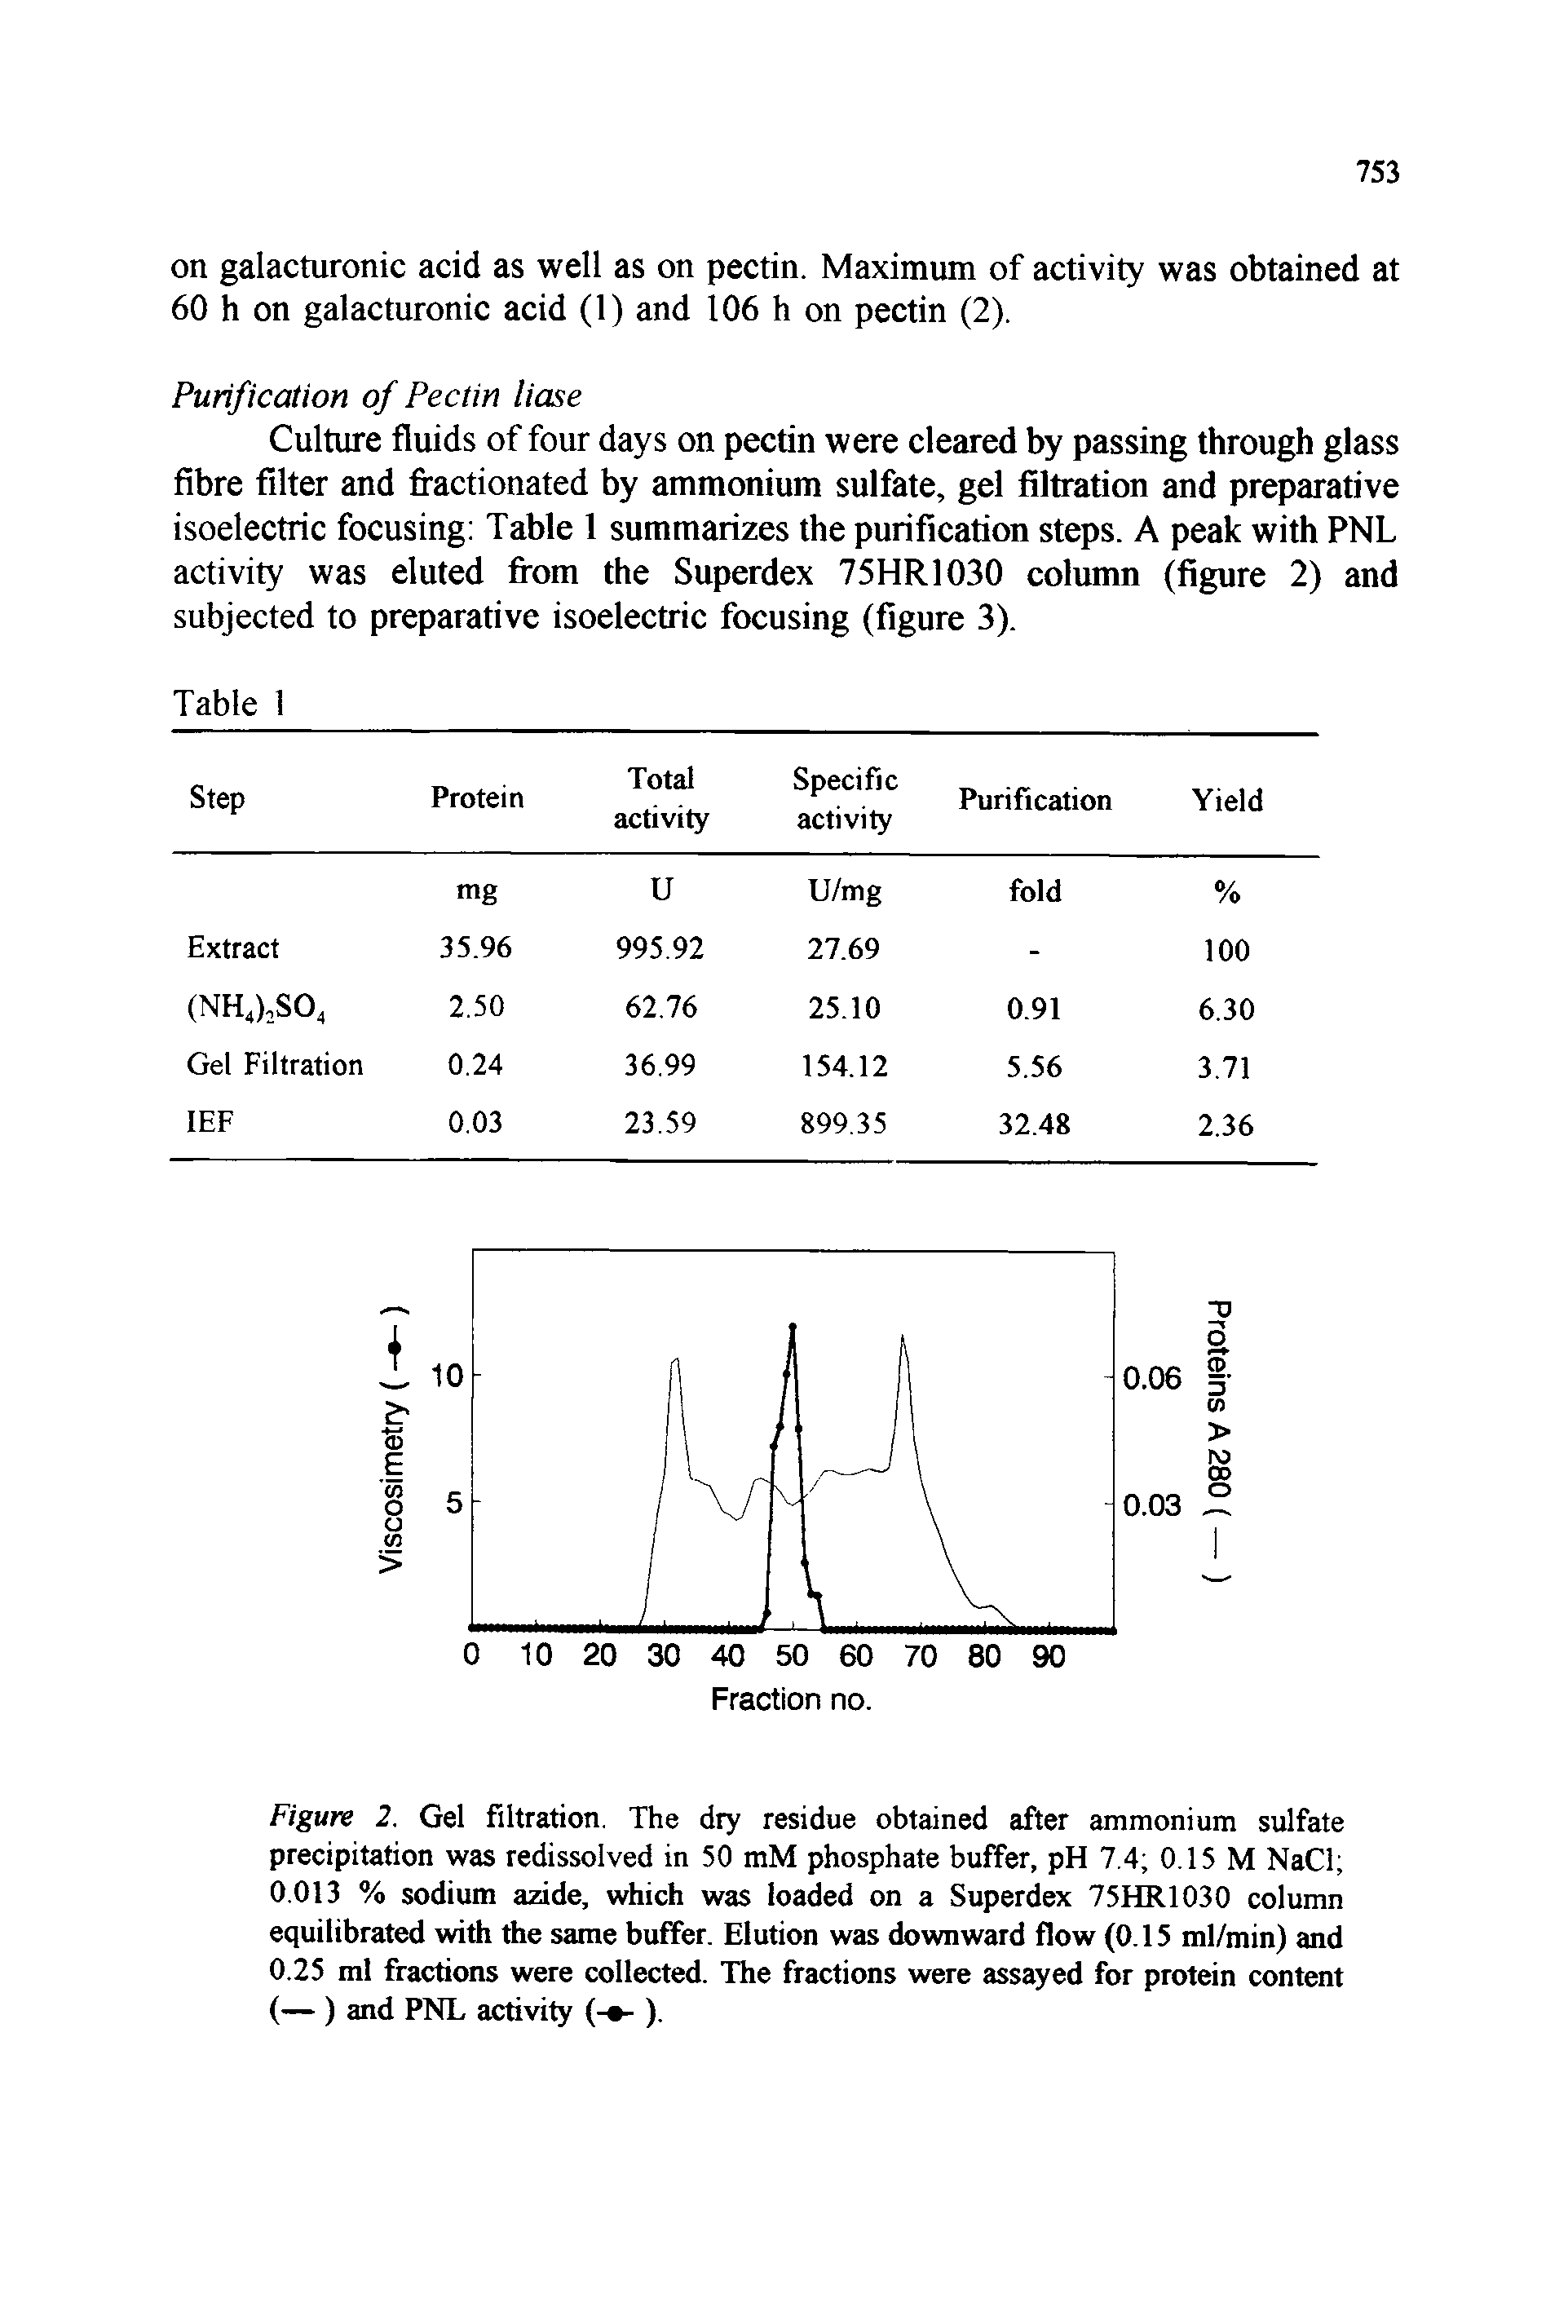 Figure 2. Gel filtration. The dry residue obtained after ammonium sulfate precipitation was redissolved in 50 mM phosphate buffer, pH 7.4 0.15 M NaCl 0.013 % sodium azide, which was loaded on a Superdex 75HR1030 column equilibrated with the same buffer. Elution was downward flow (0.15 ml/min) and 0.25 ml fractions were collected. The fractions were assayed for protein content (— ) and PNL activity (- - ).